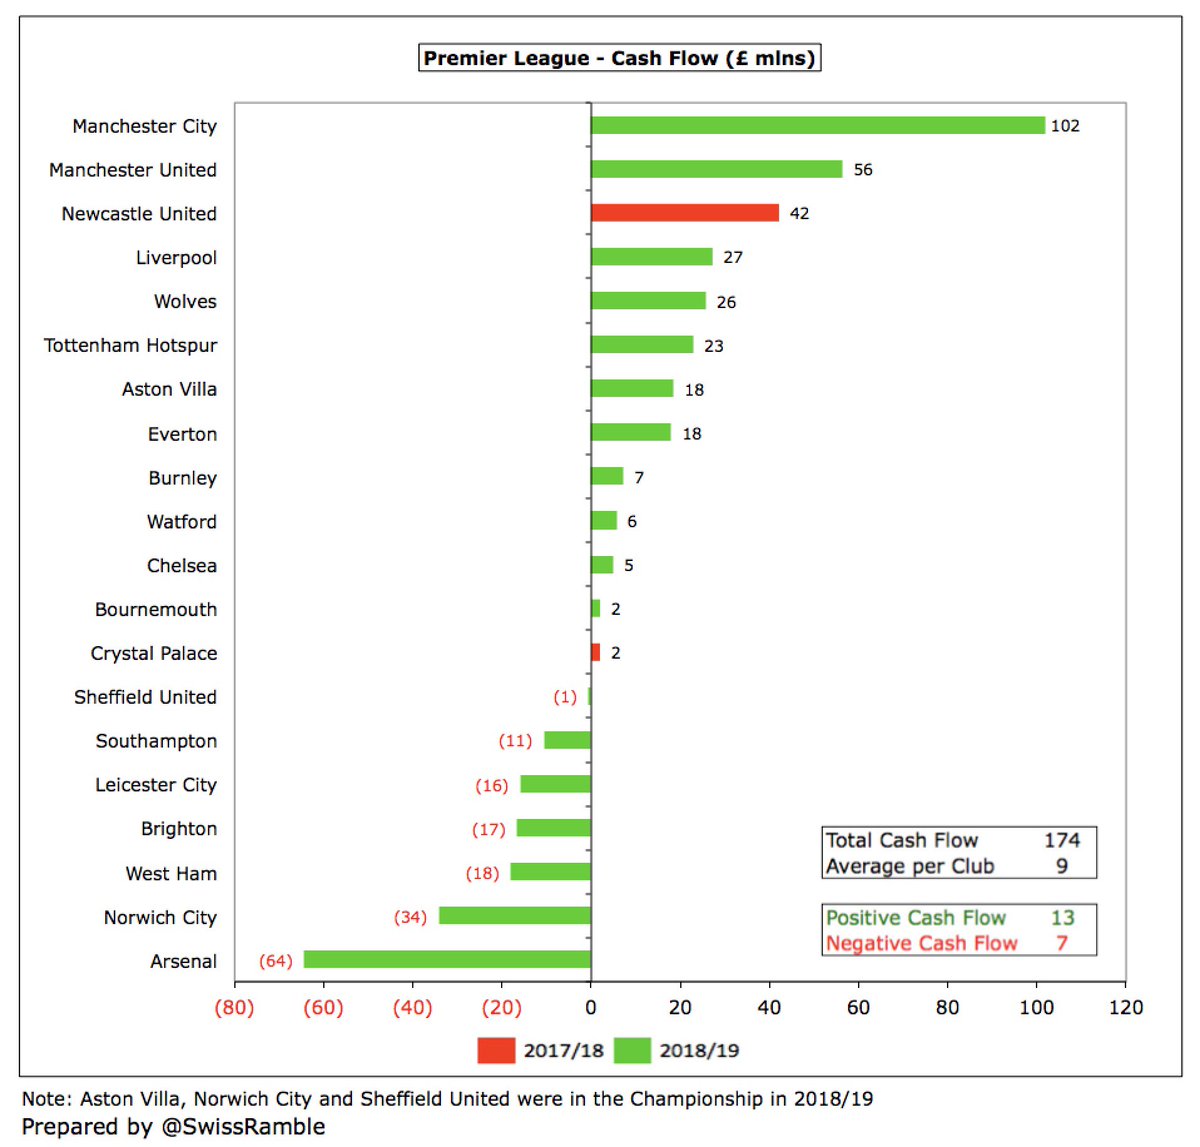 Overall, cash flow looks pretty good in the Premier League with net inflow of £174m and 13 clubs with positive cash flow. The largest increases in cash were produced by the Manchester clubs,  #MCFC £102m and  #MUFC £56m. In contrast,  #AFC cash balance dropped £64m.